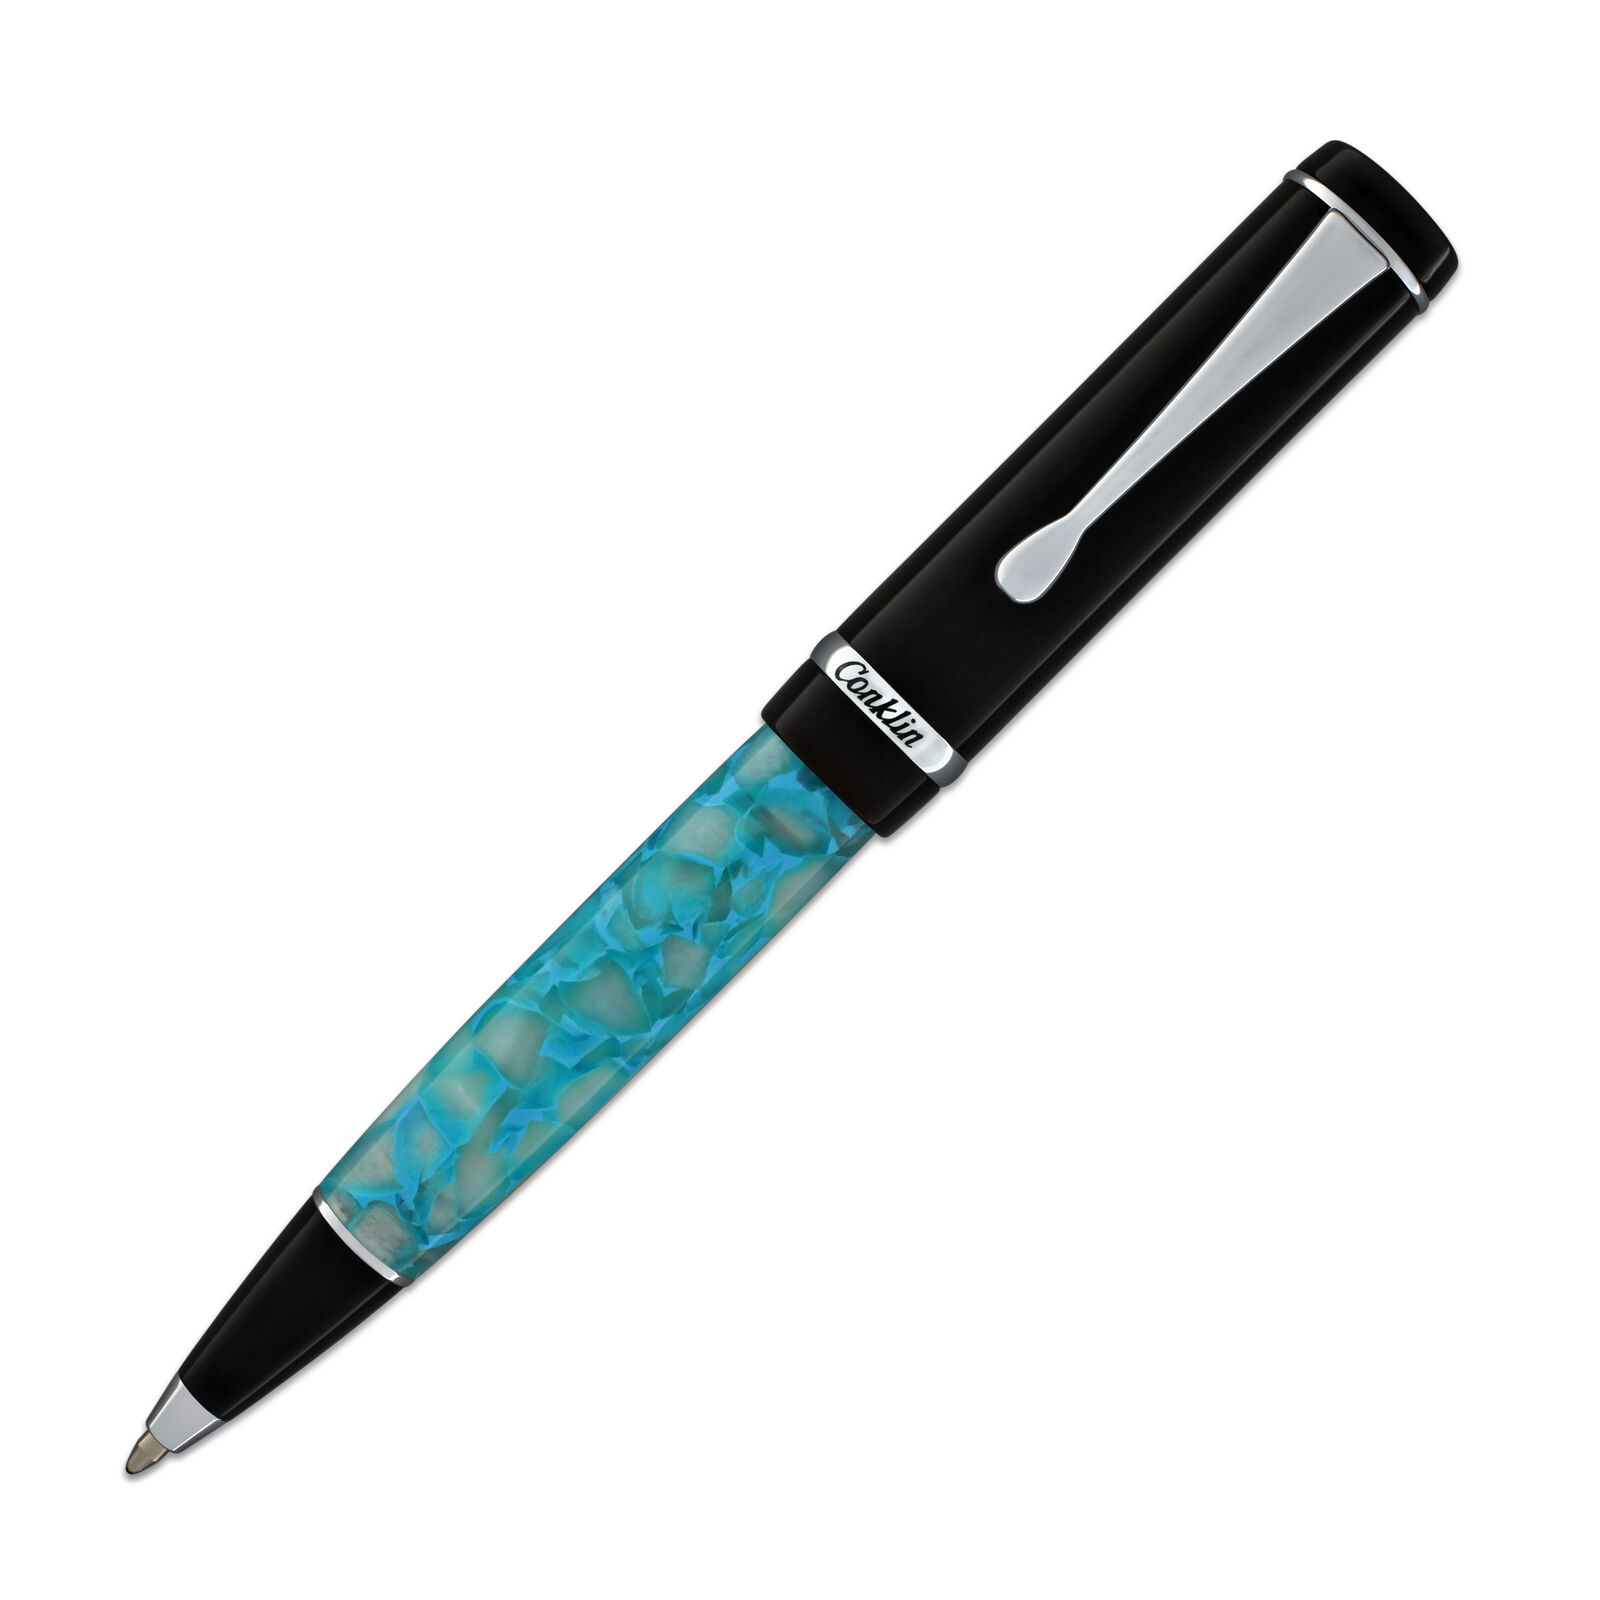 Conklin Duragraph Ballpoint Pen in Turquoise Nights NEW in box CK45345